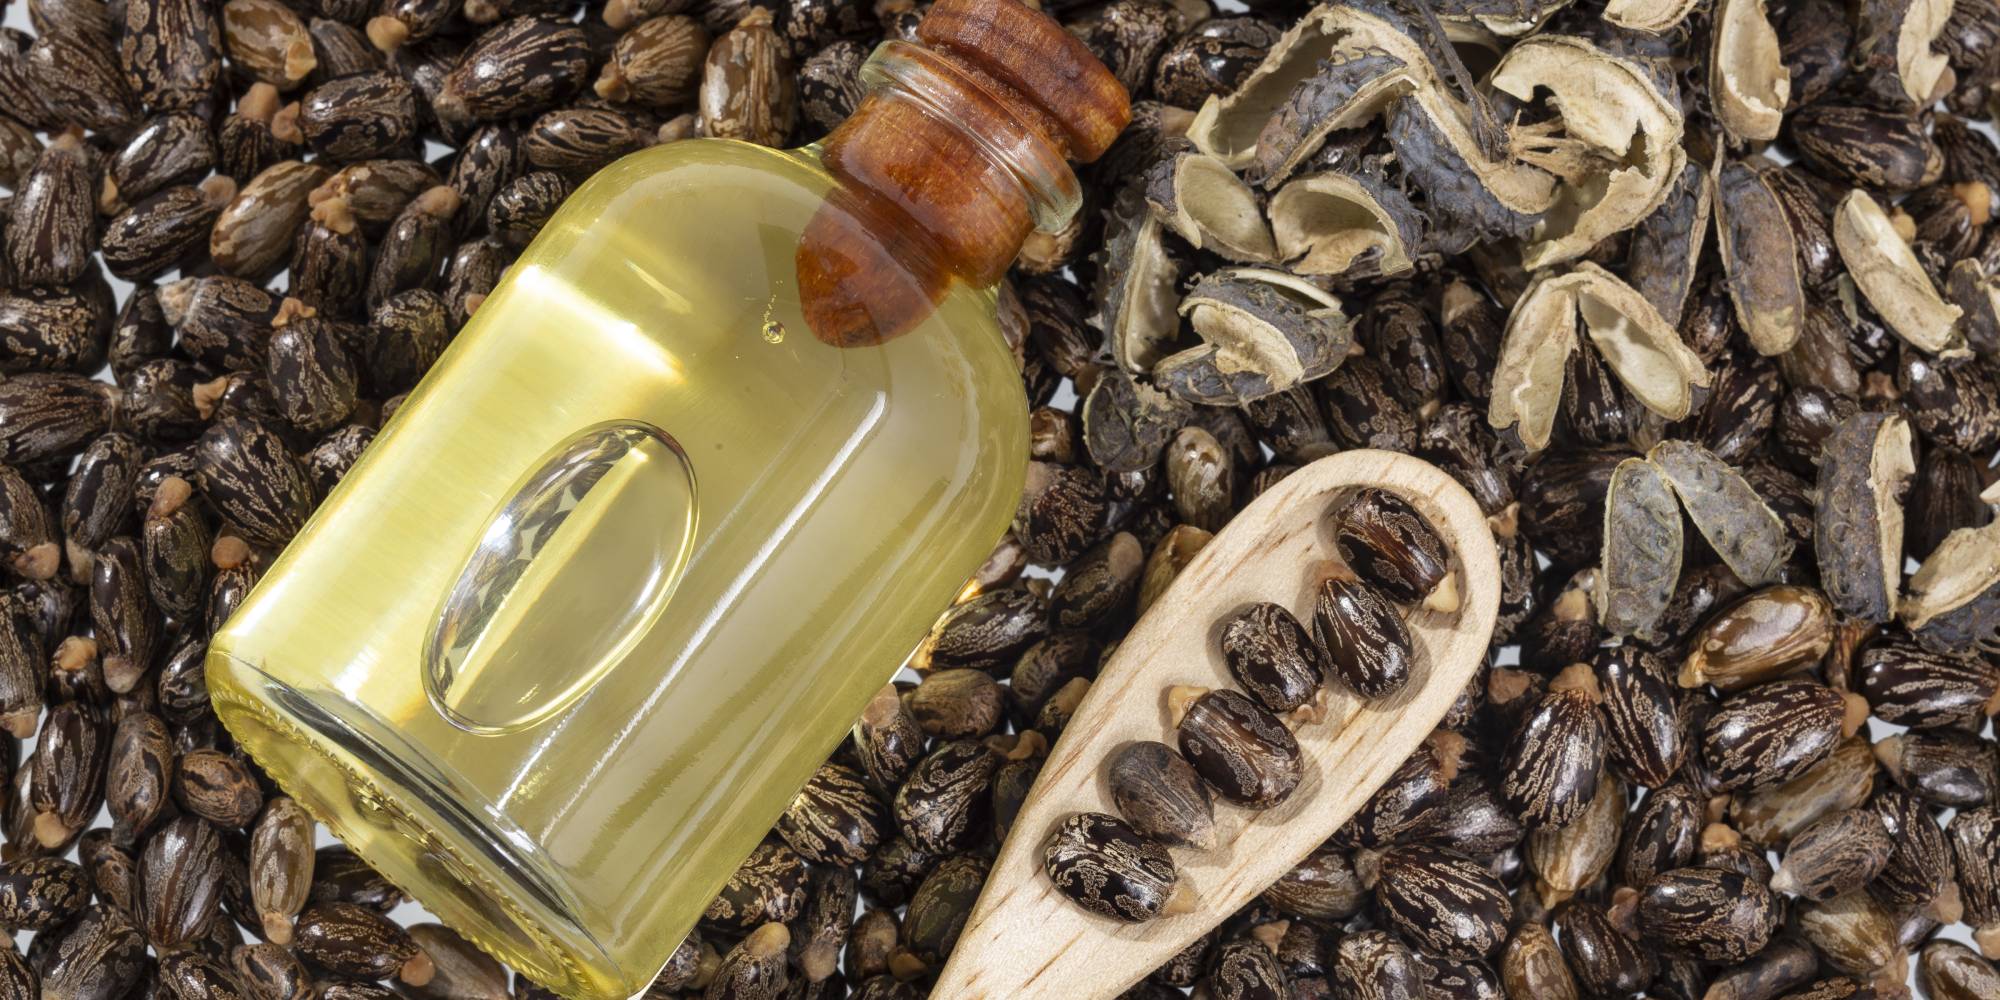 Therapeutic uses of castor oil